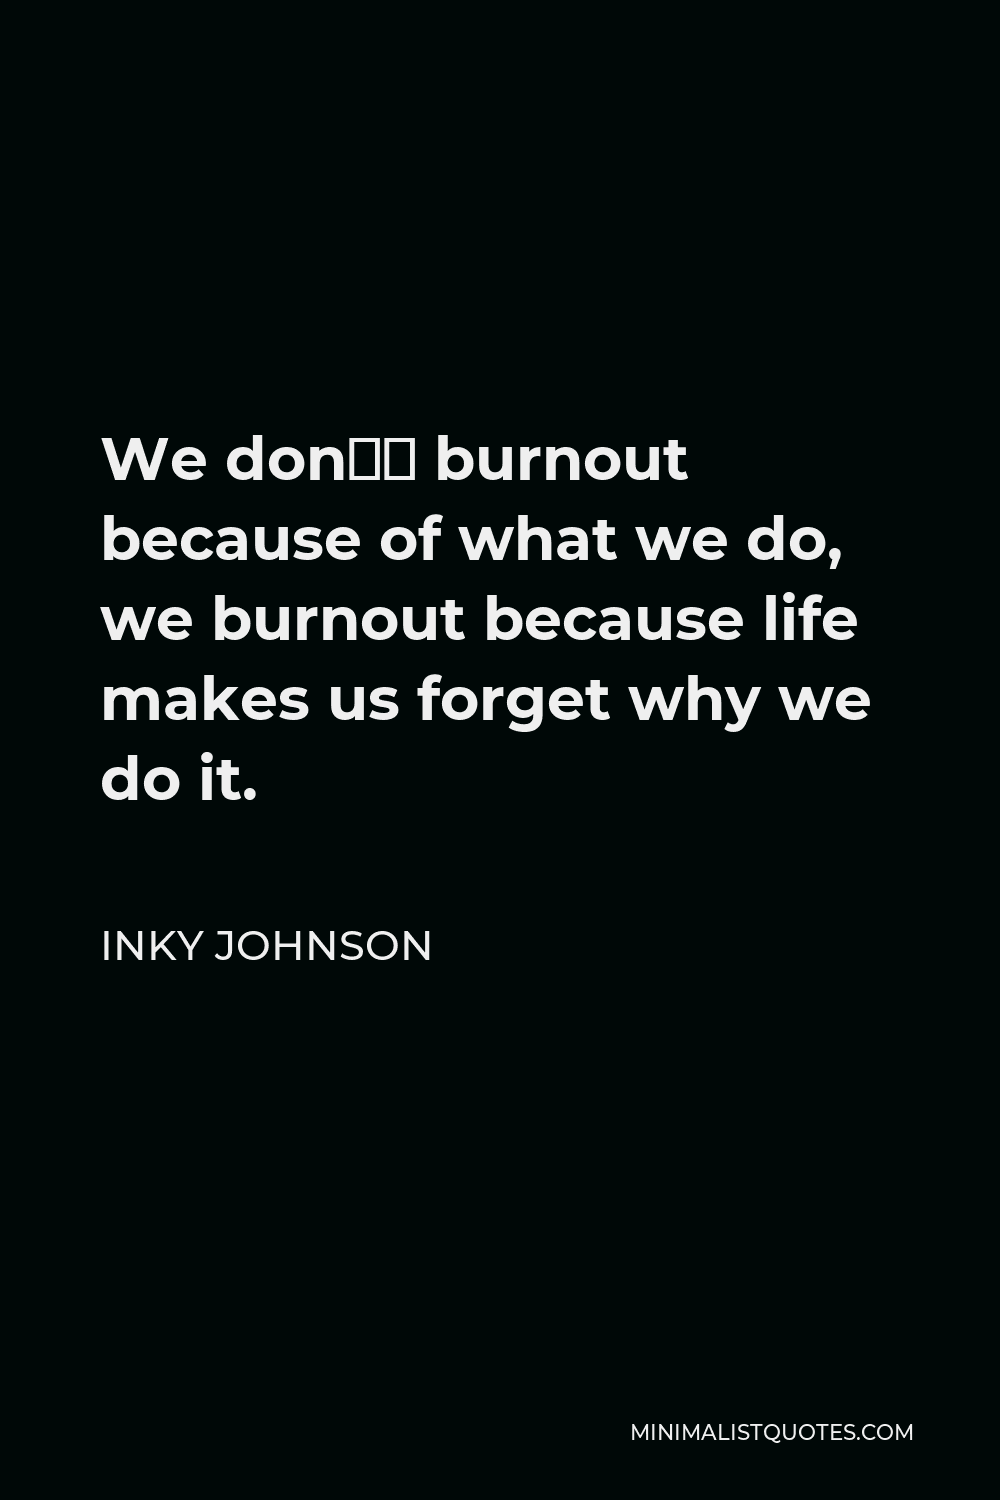 Inky Johnson Quote - We don’t burnout because of what we do, we burnout because life makes us forget why we do it.